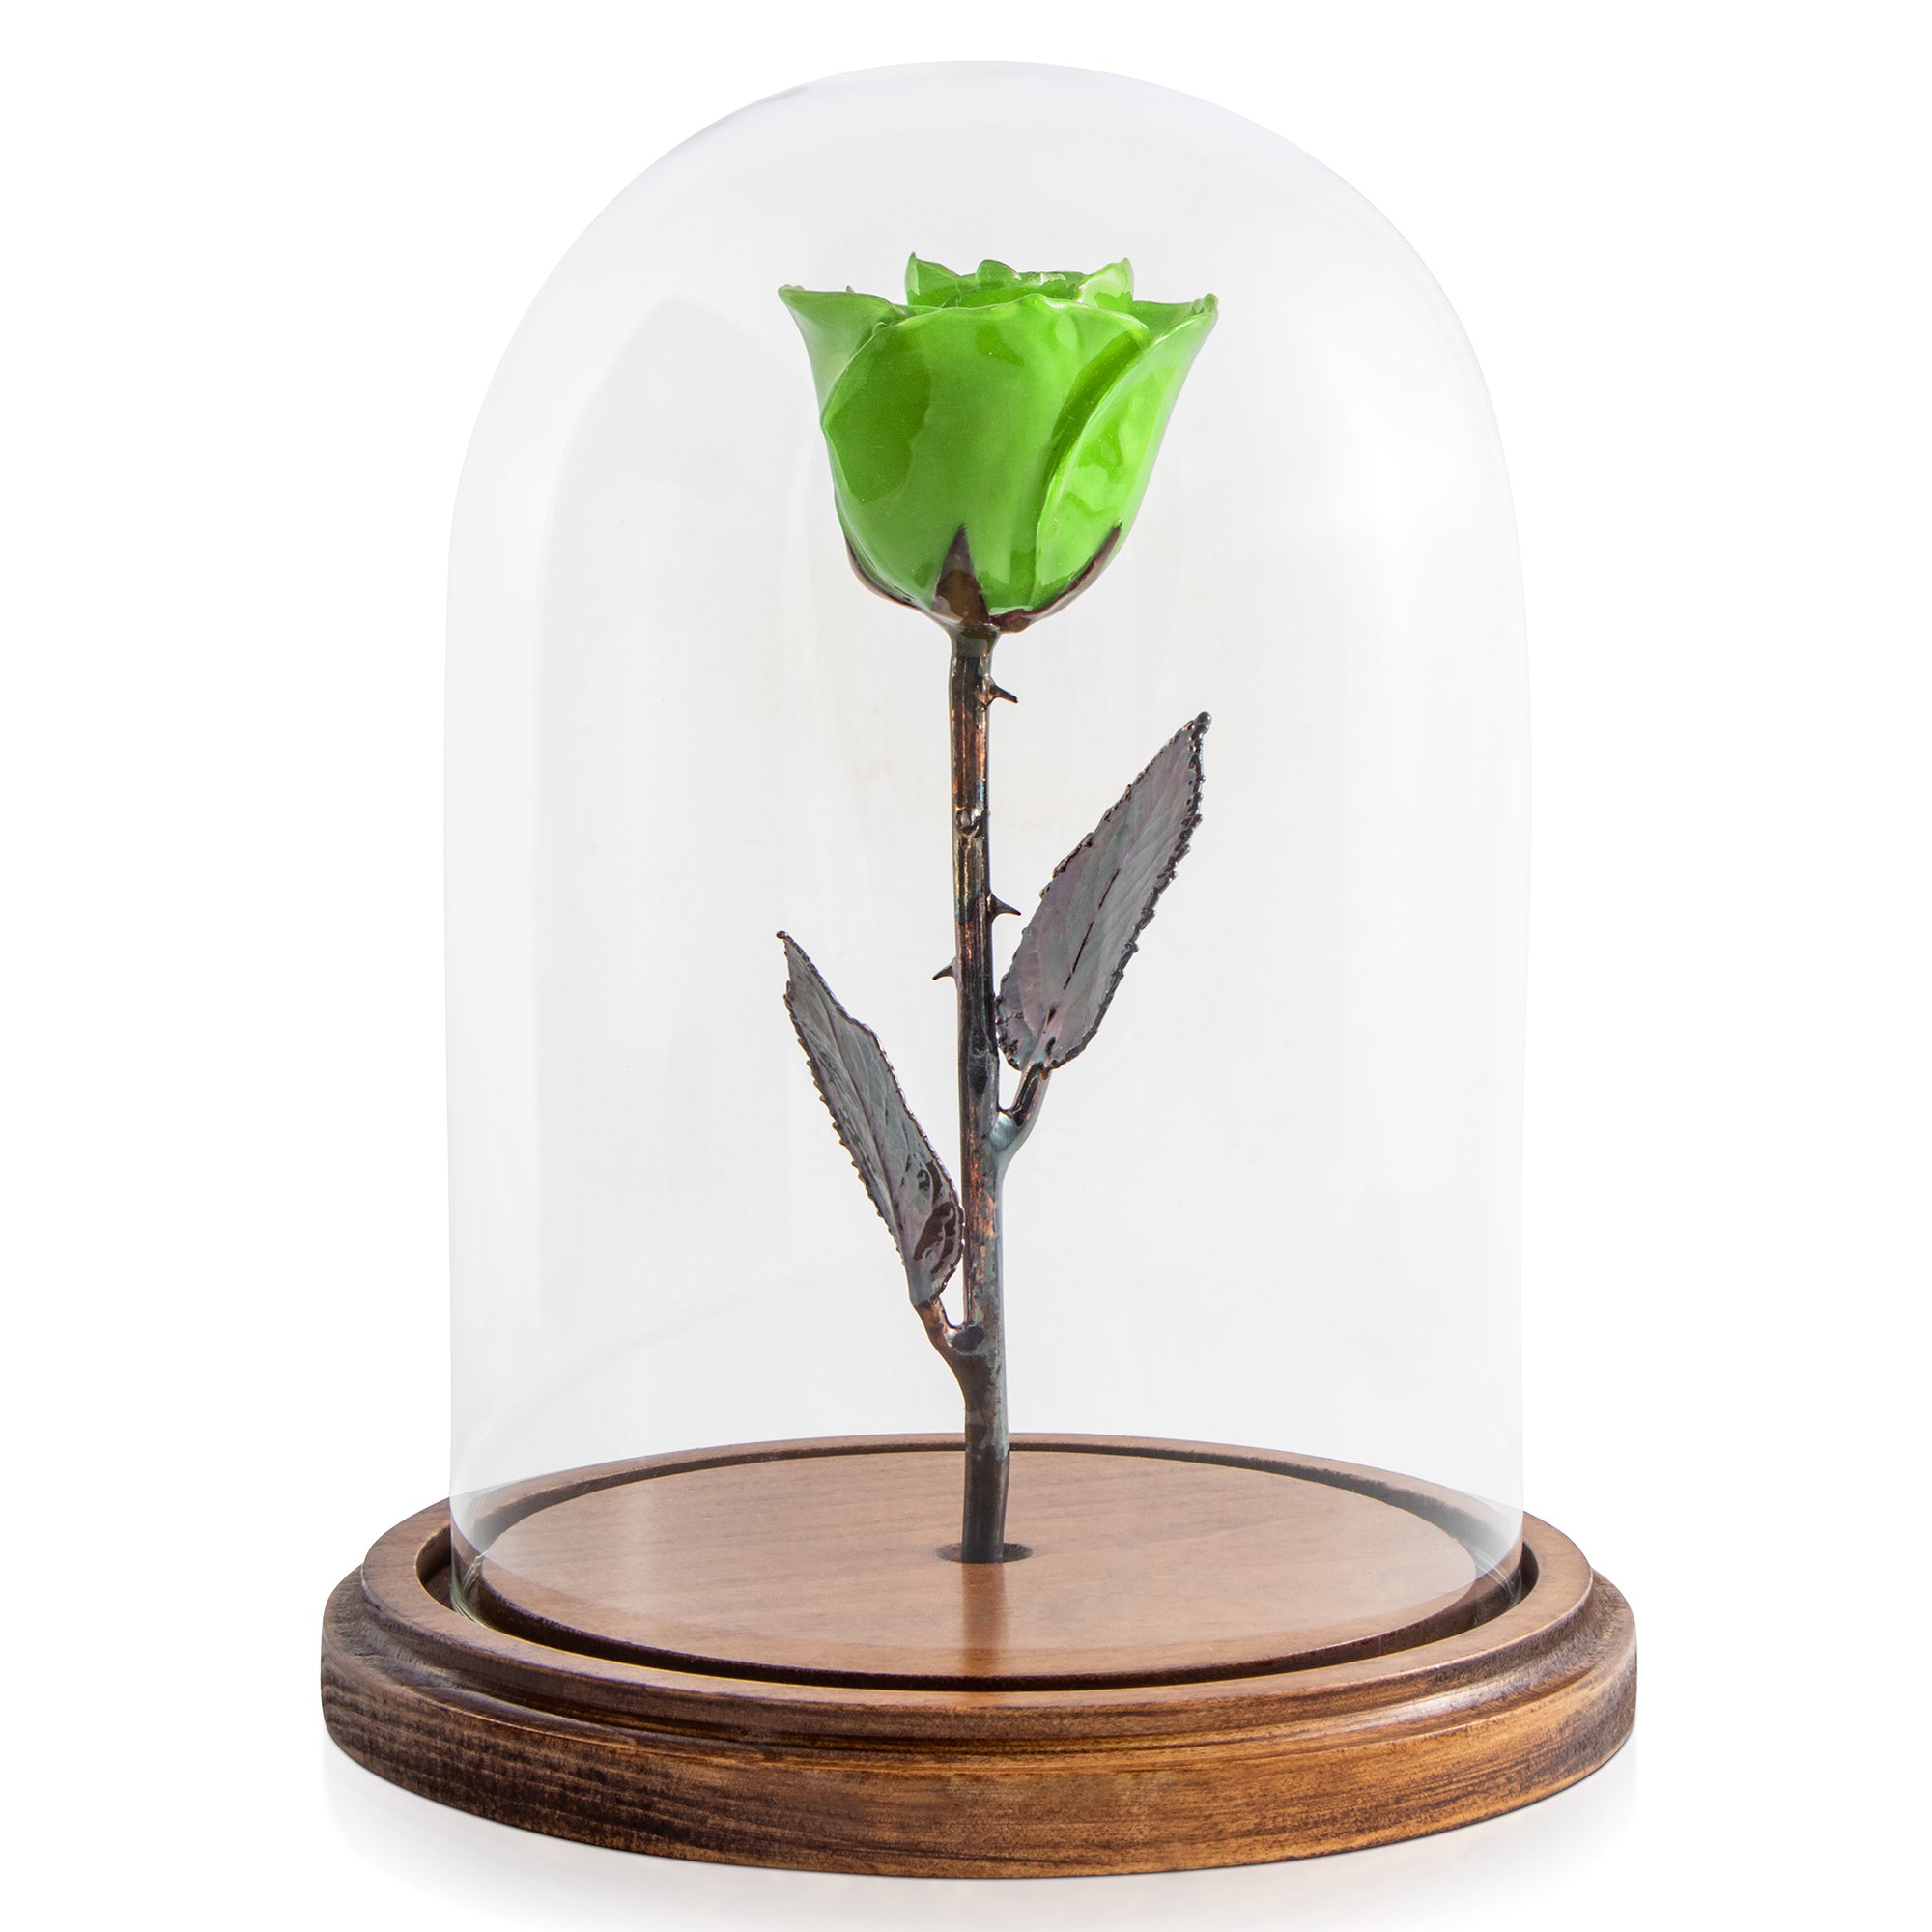 Green Enchanted Rose (aka Beauty & The Beast Rose) with Patina Copper Stem Mounted to A Hand Turned Solid Wood Base under a glass dome.